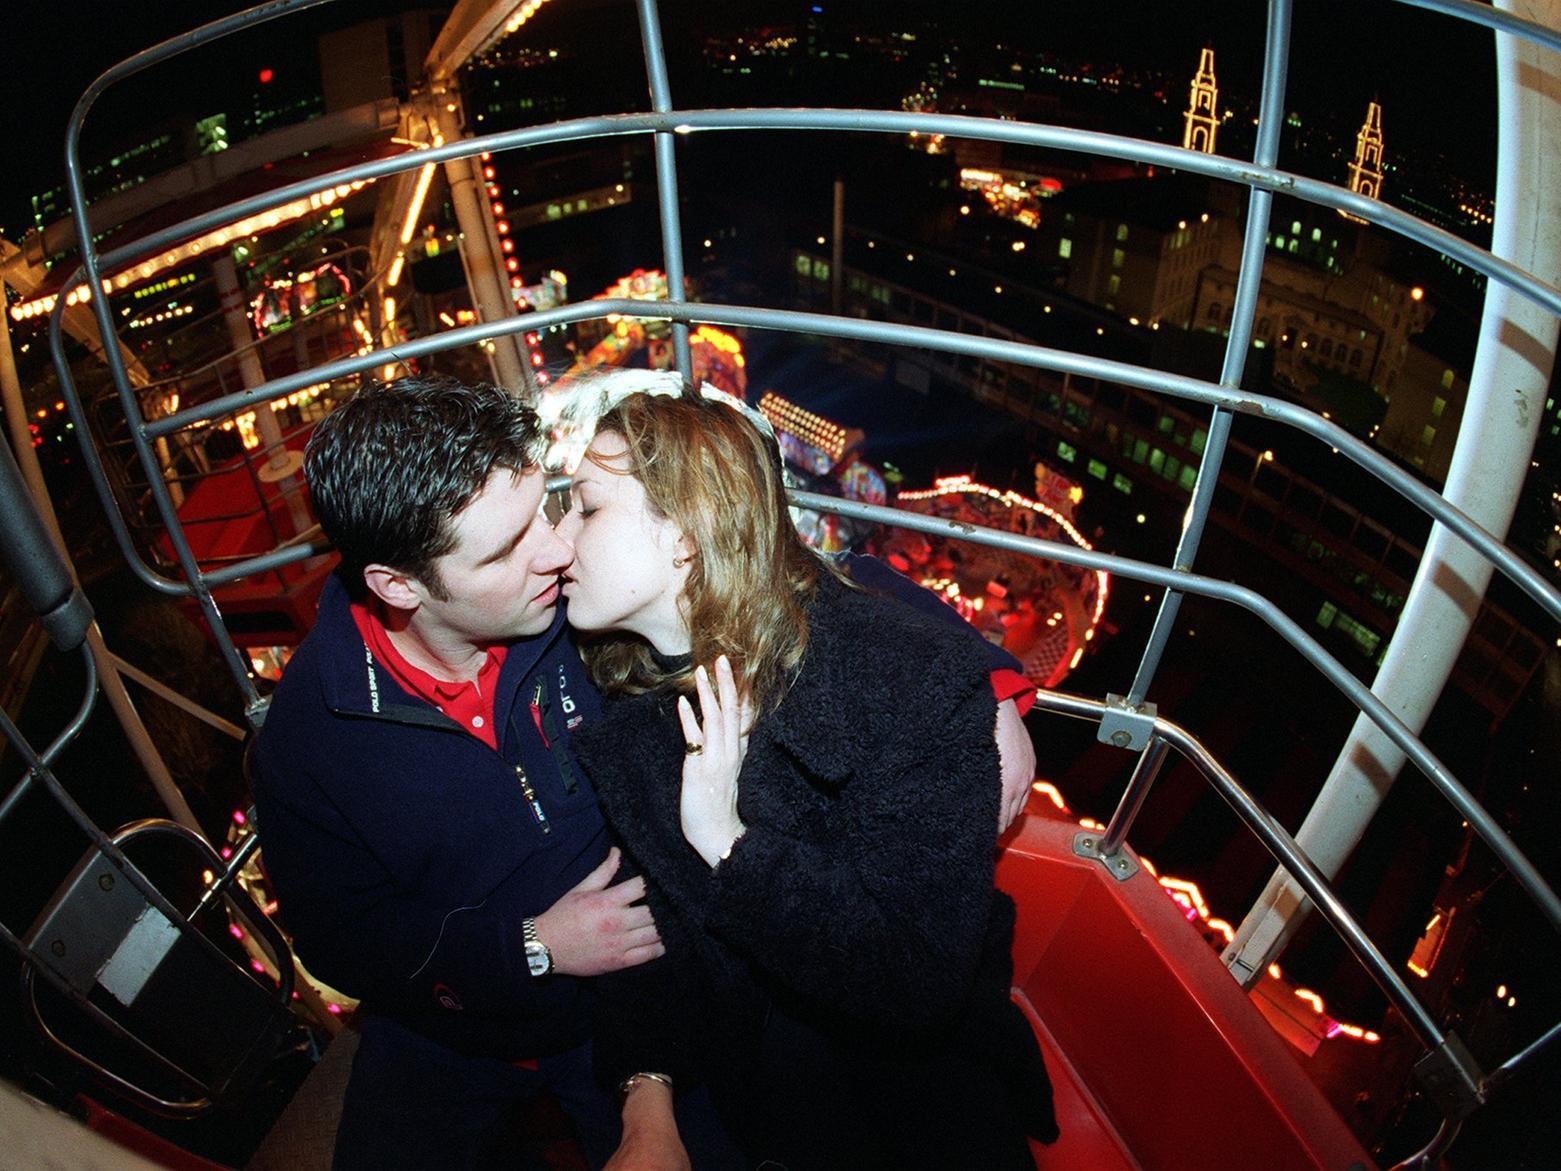 Love was in the air when Stuart Needham proposed to his girlfriend Julie Ratford on the big wheel at the Great Valentines Fun Fair in the city centre.